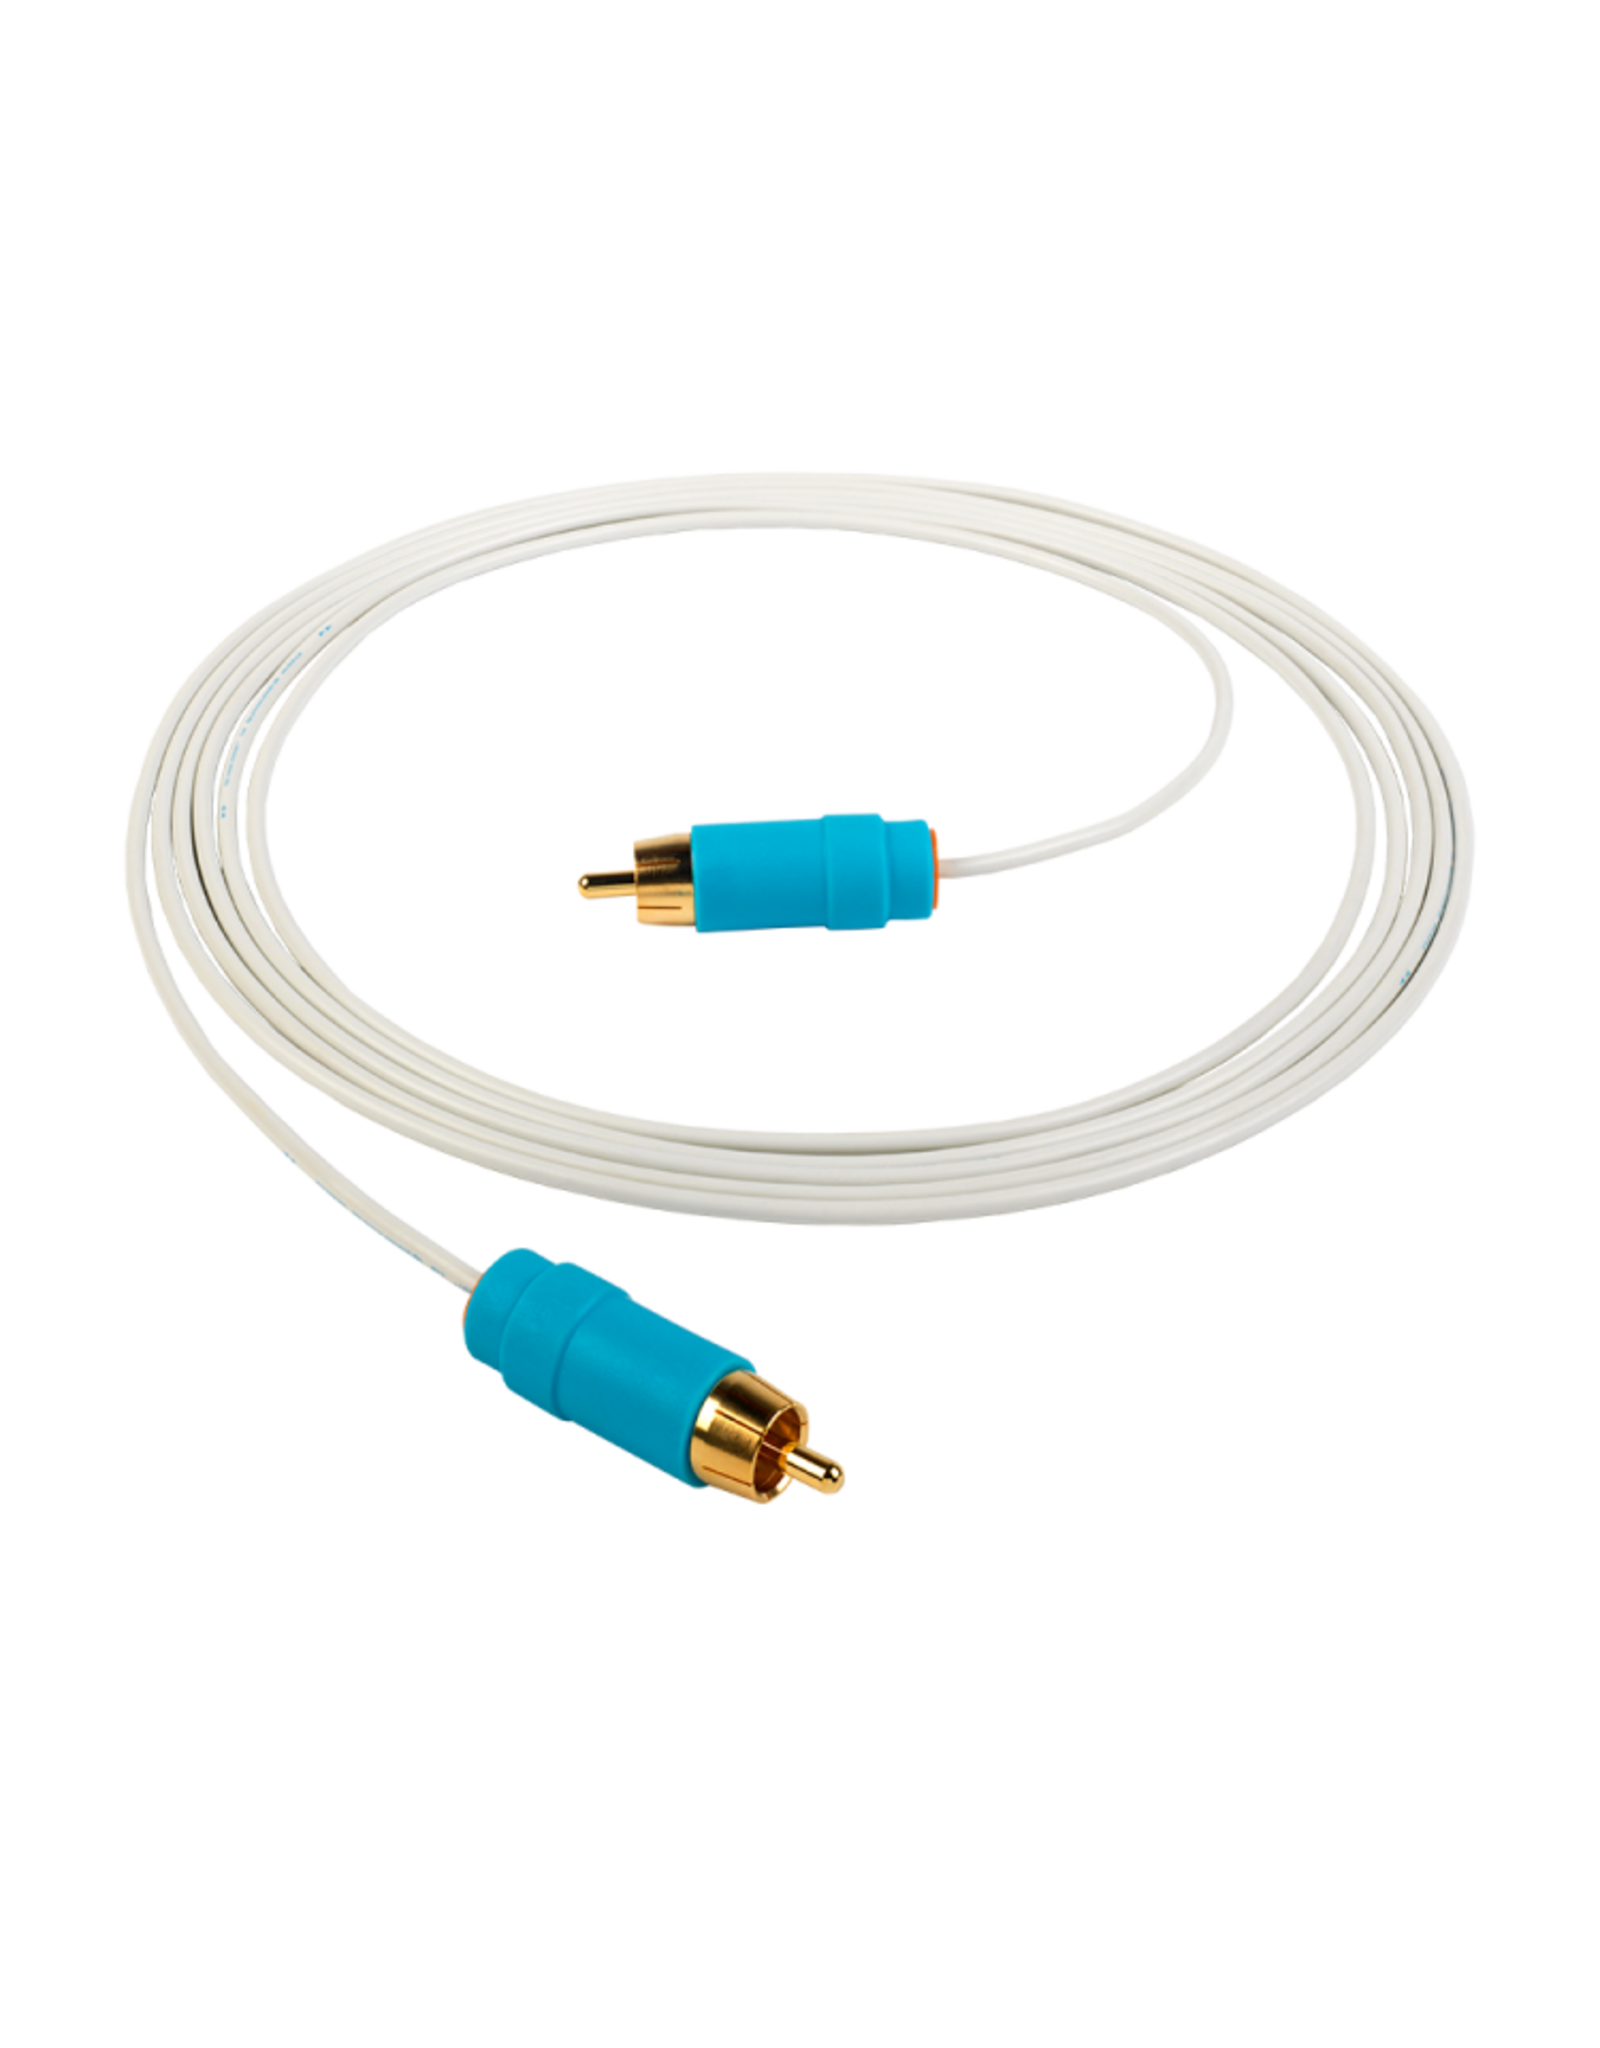 Chord Company Chord C-sub Analog RCA Subwoofer Cable